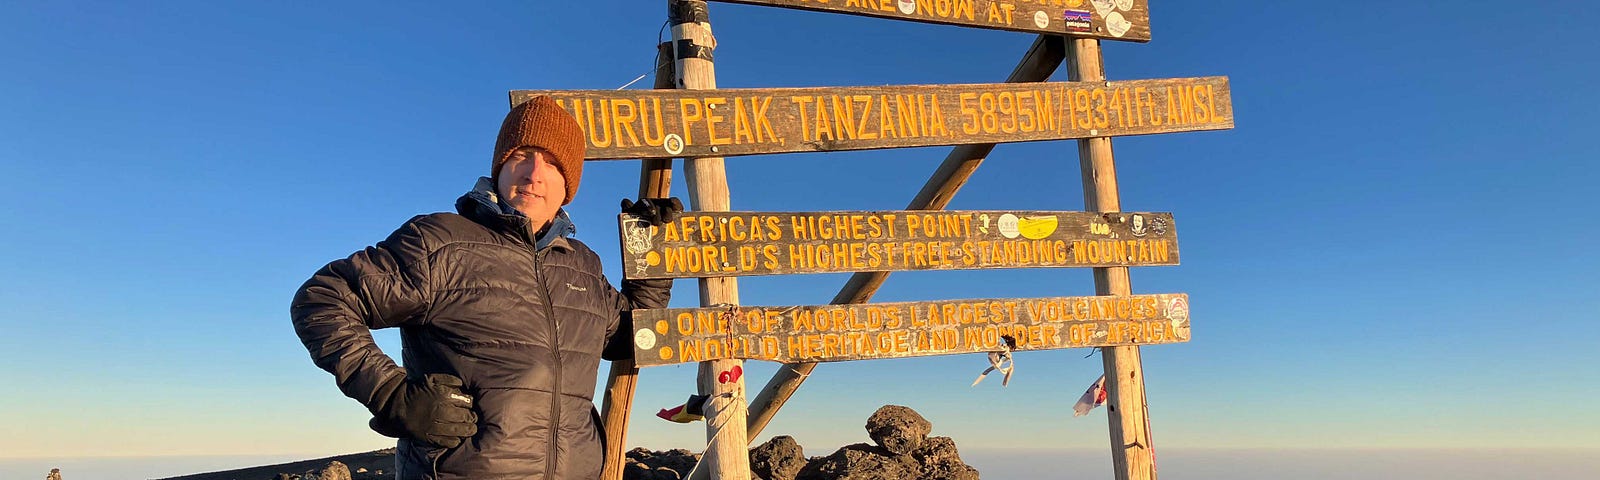 Author standing next to the summit sign at the top of Mount Kilimanjaro at sunrise under deep blue sky.